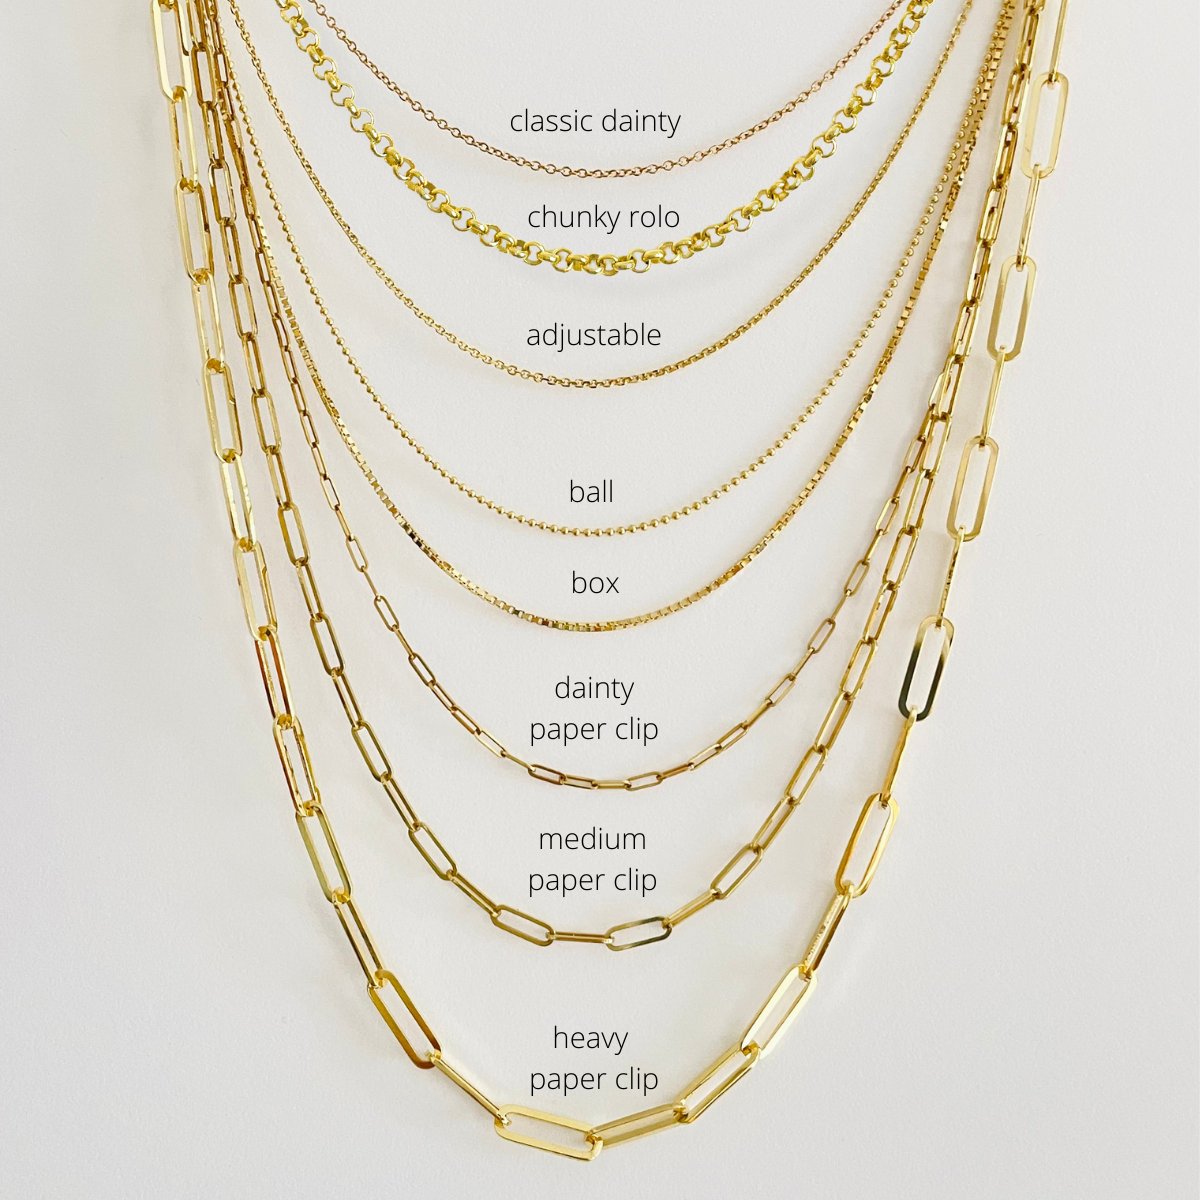 The Classic Dainty Chain - Sterling Silver & Gold Filled